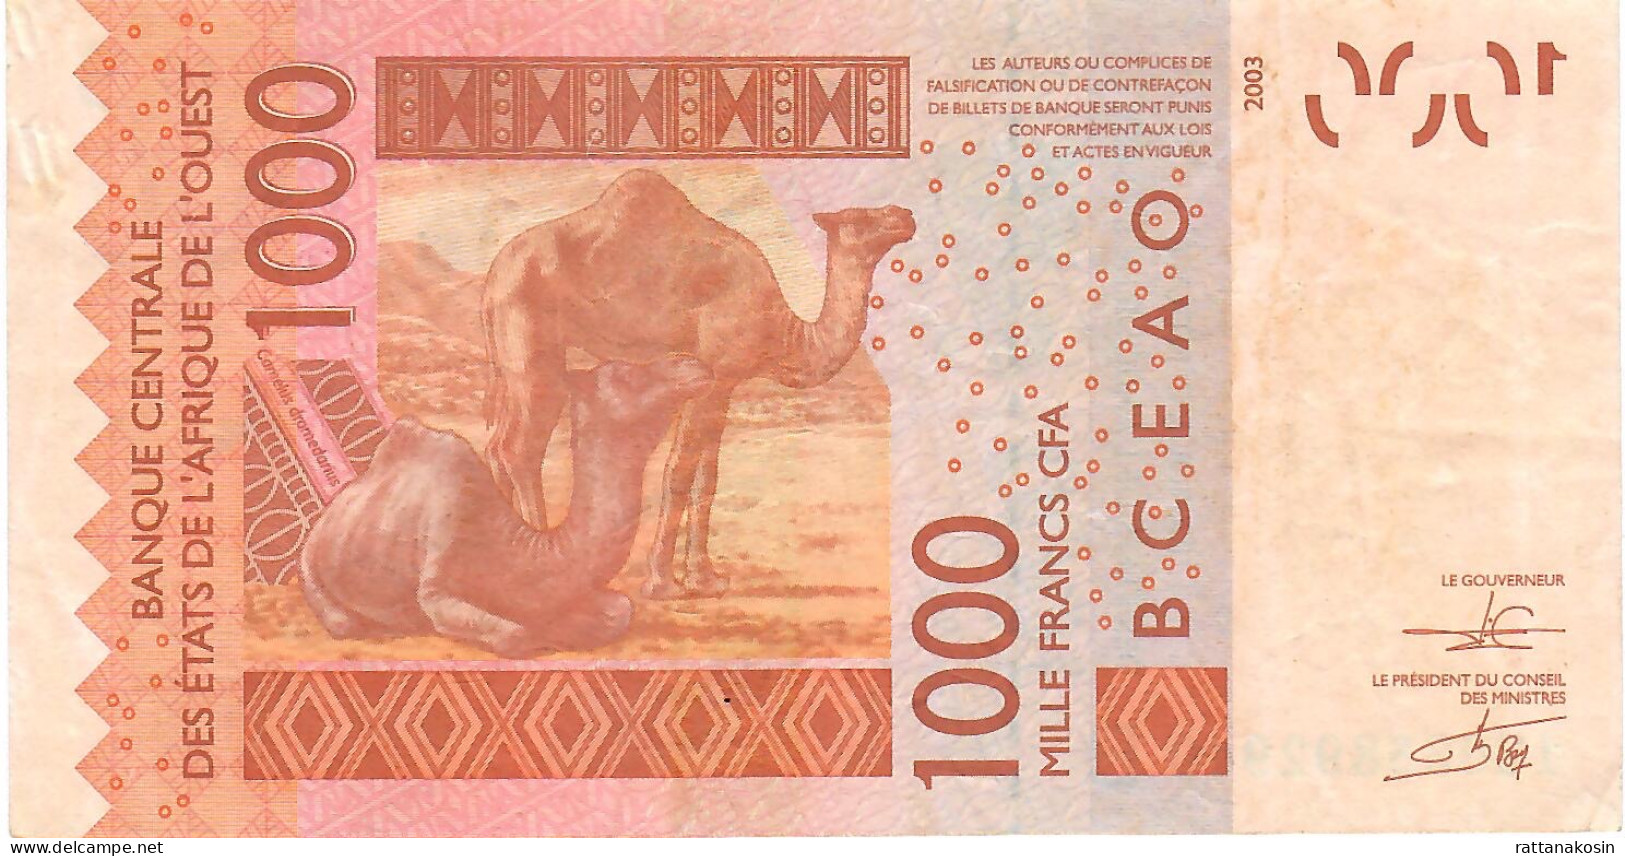 W.A.S. BENIN P215Bl 1000 FRANCS (20)12  2012 Signature 39  XF NO P.h. - West African States